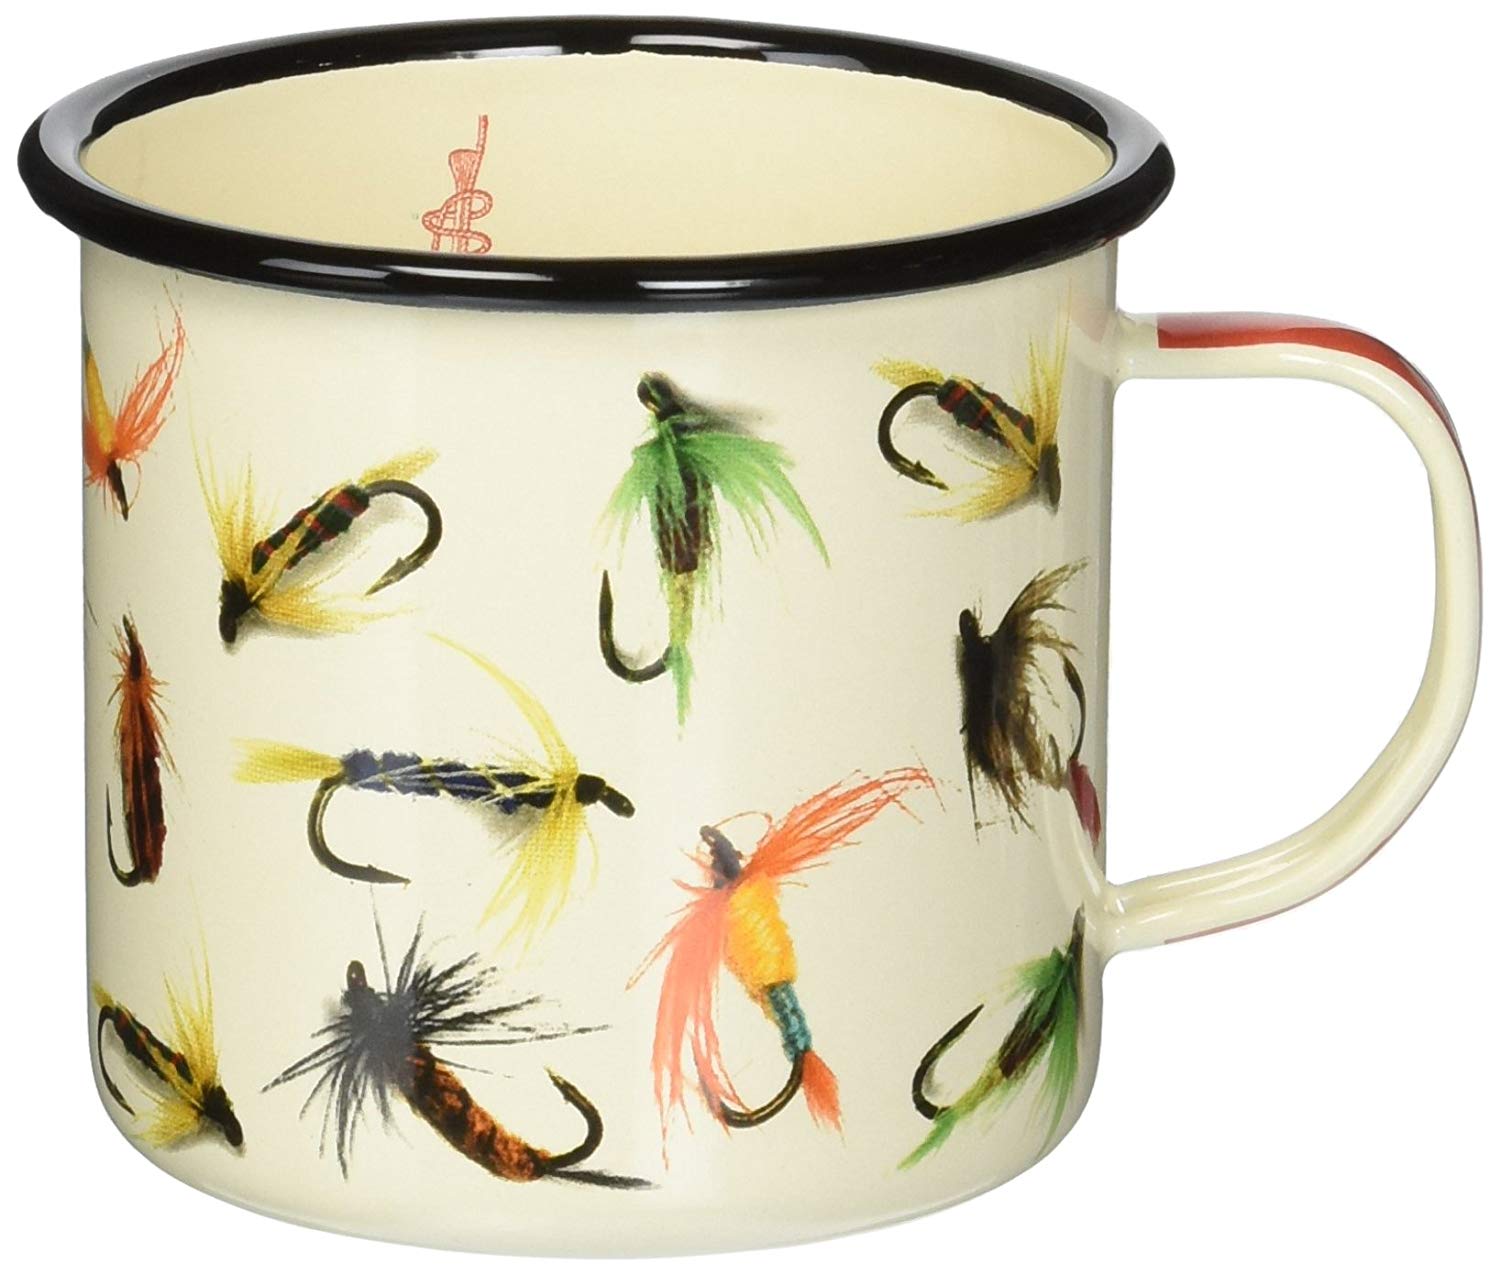 Best Fly Fishing Gifts Under $25 - Fly Fishing Lines